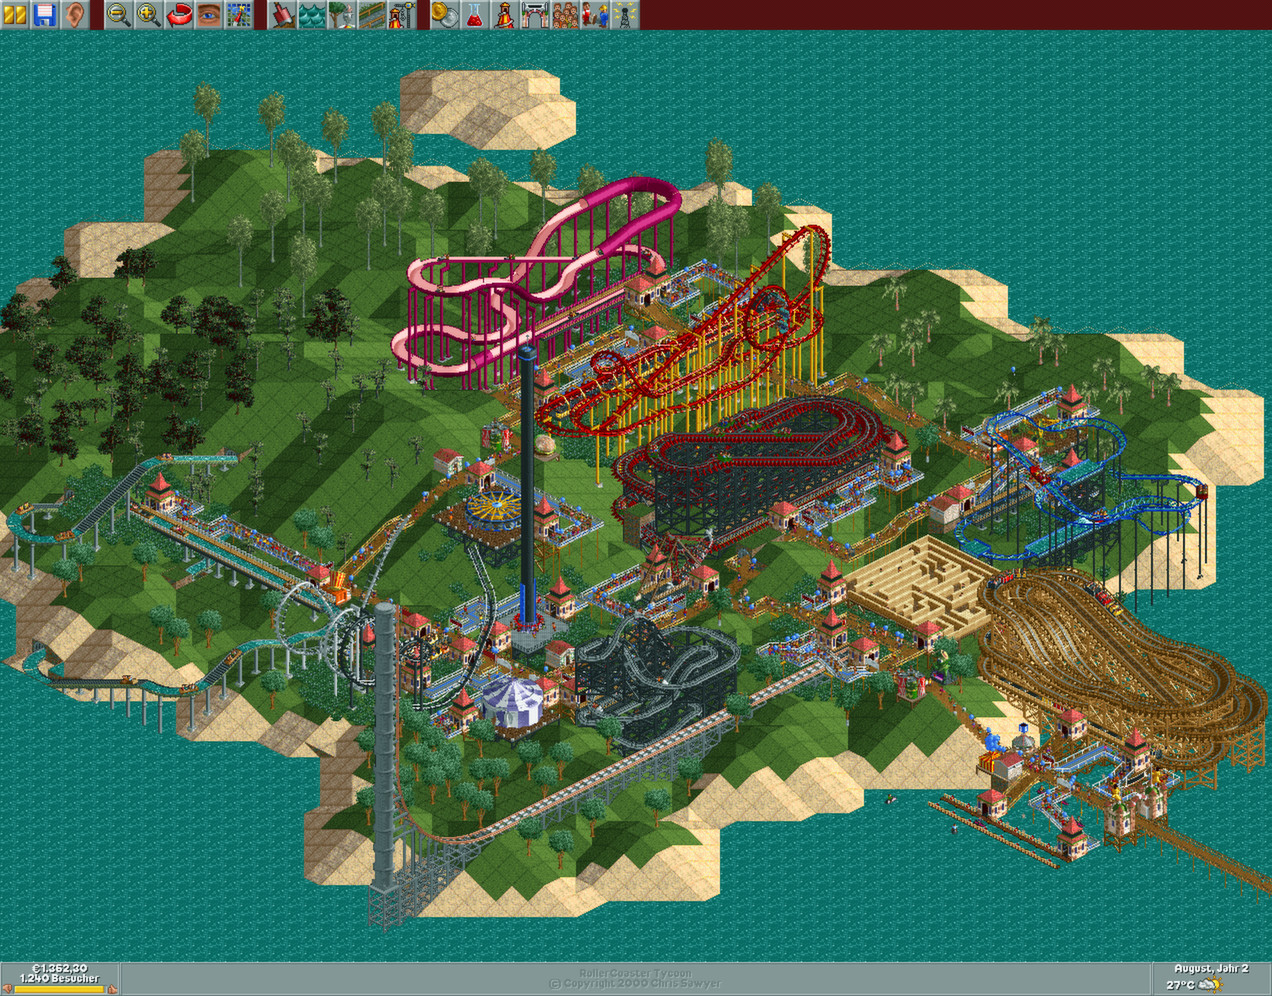 RollerCoaster Tycoon Game Museum